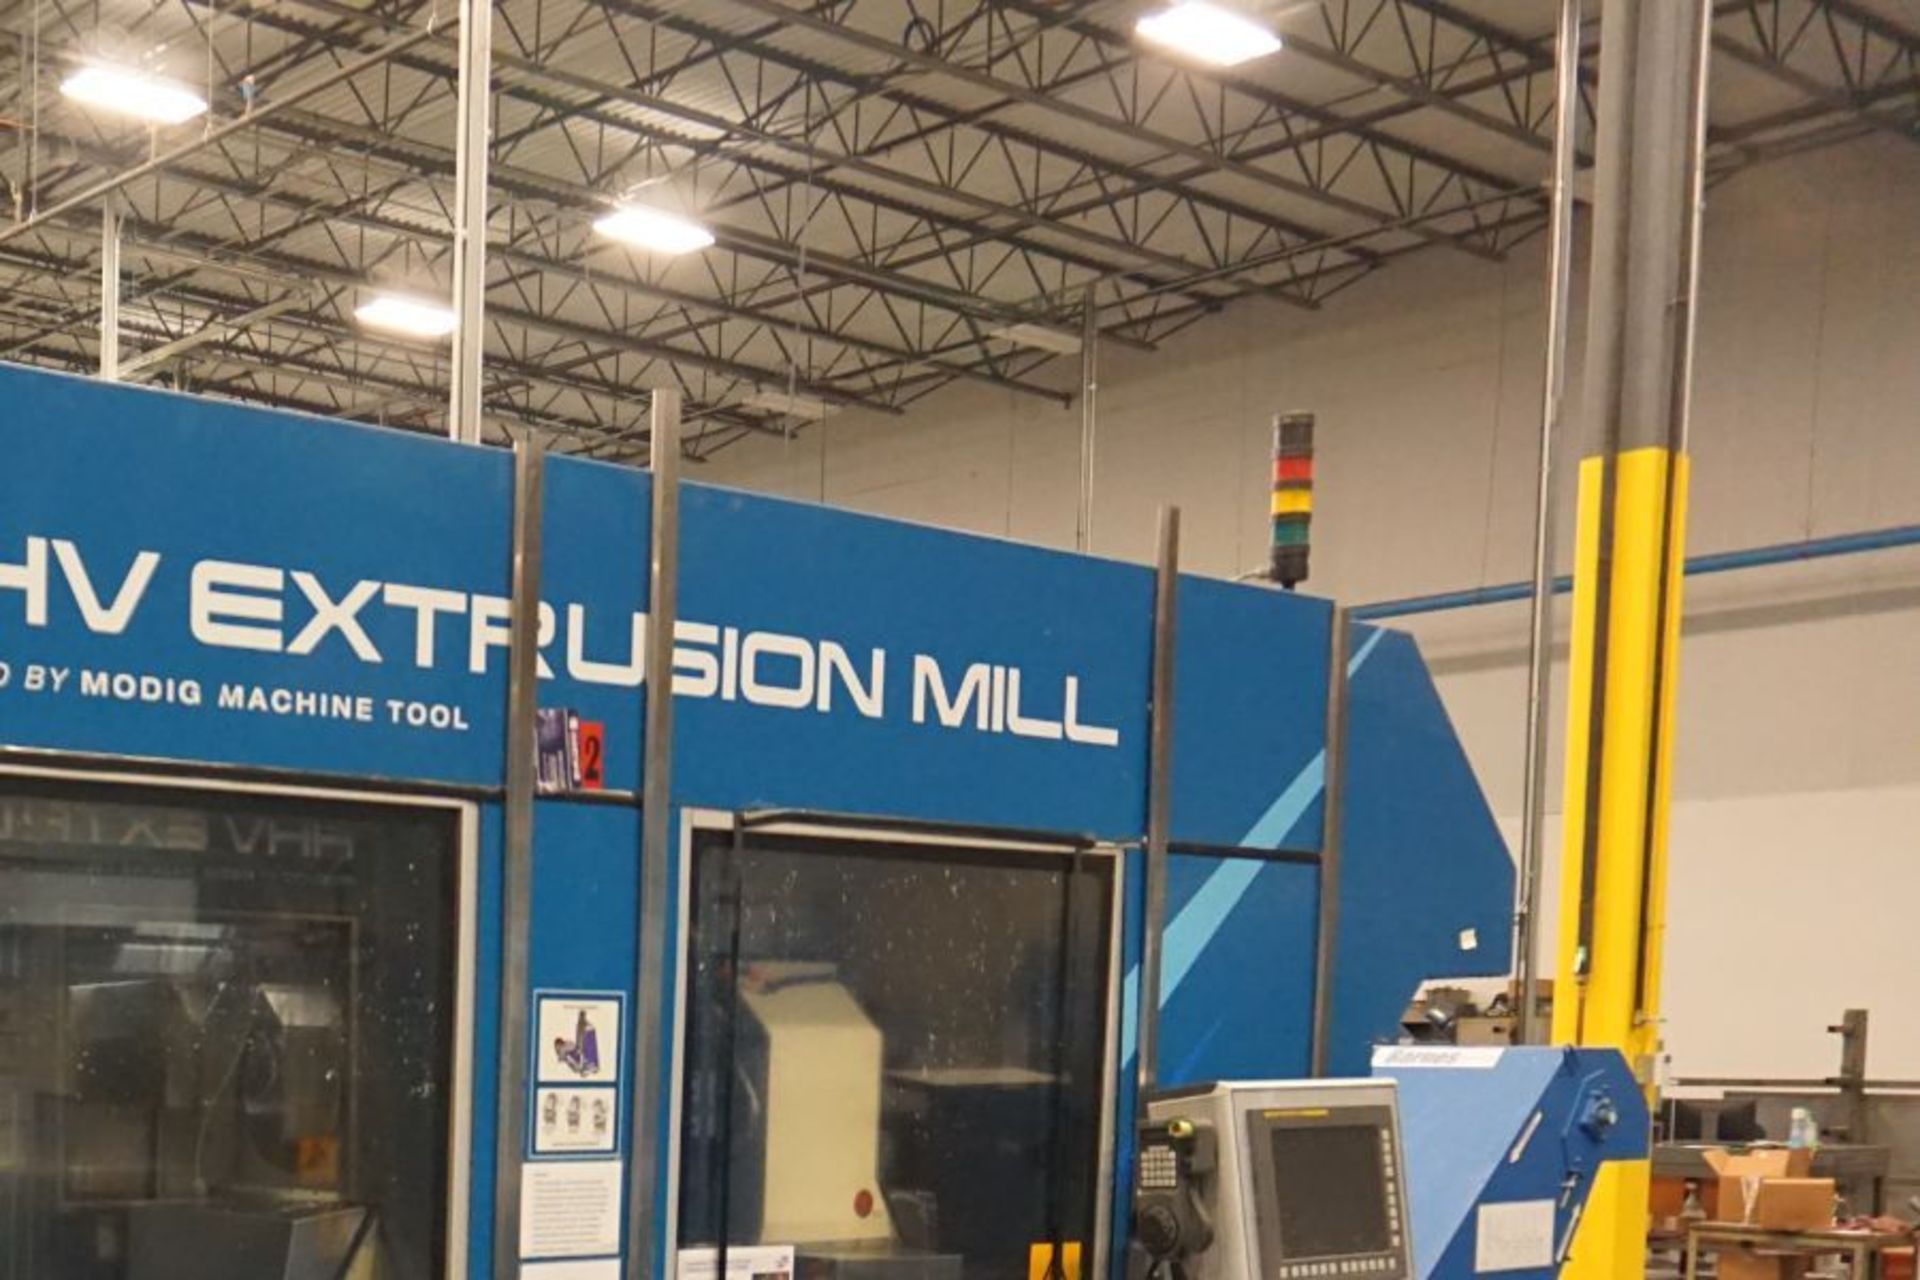 2014, Modig HHV 4-Axis High Speed Extrusion Mill, Fanuc 30i Model B, Fischer 1700 MM 30K Spindle - Image 4 of 9